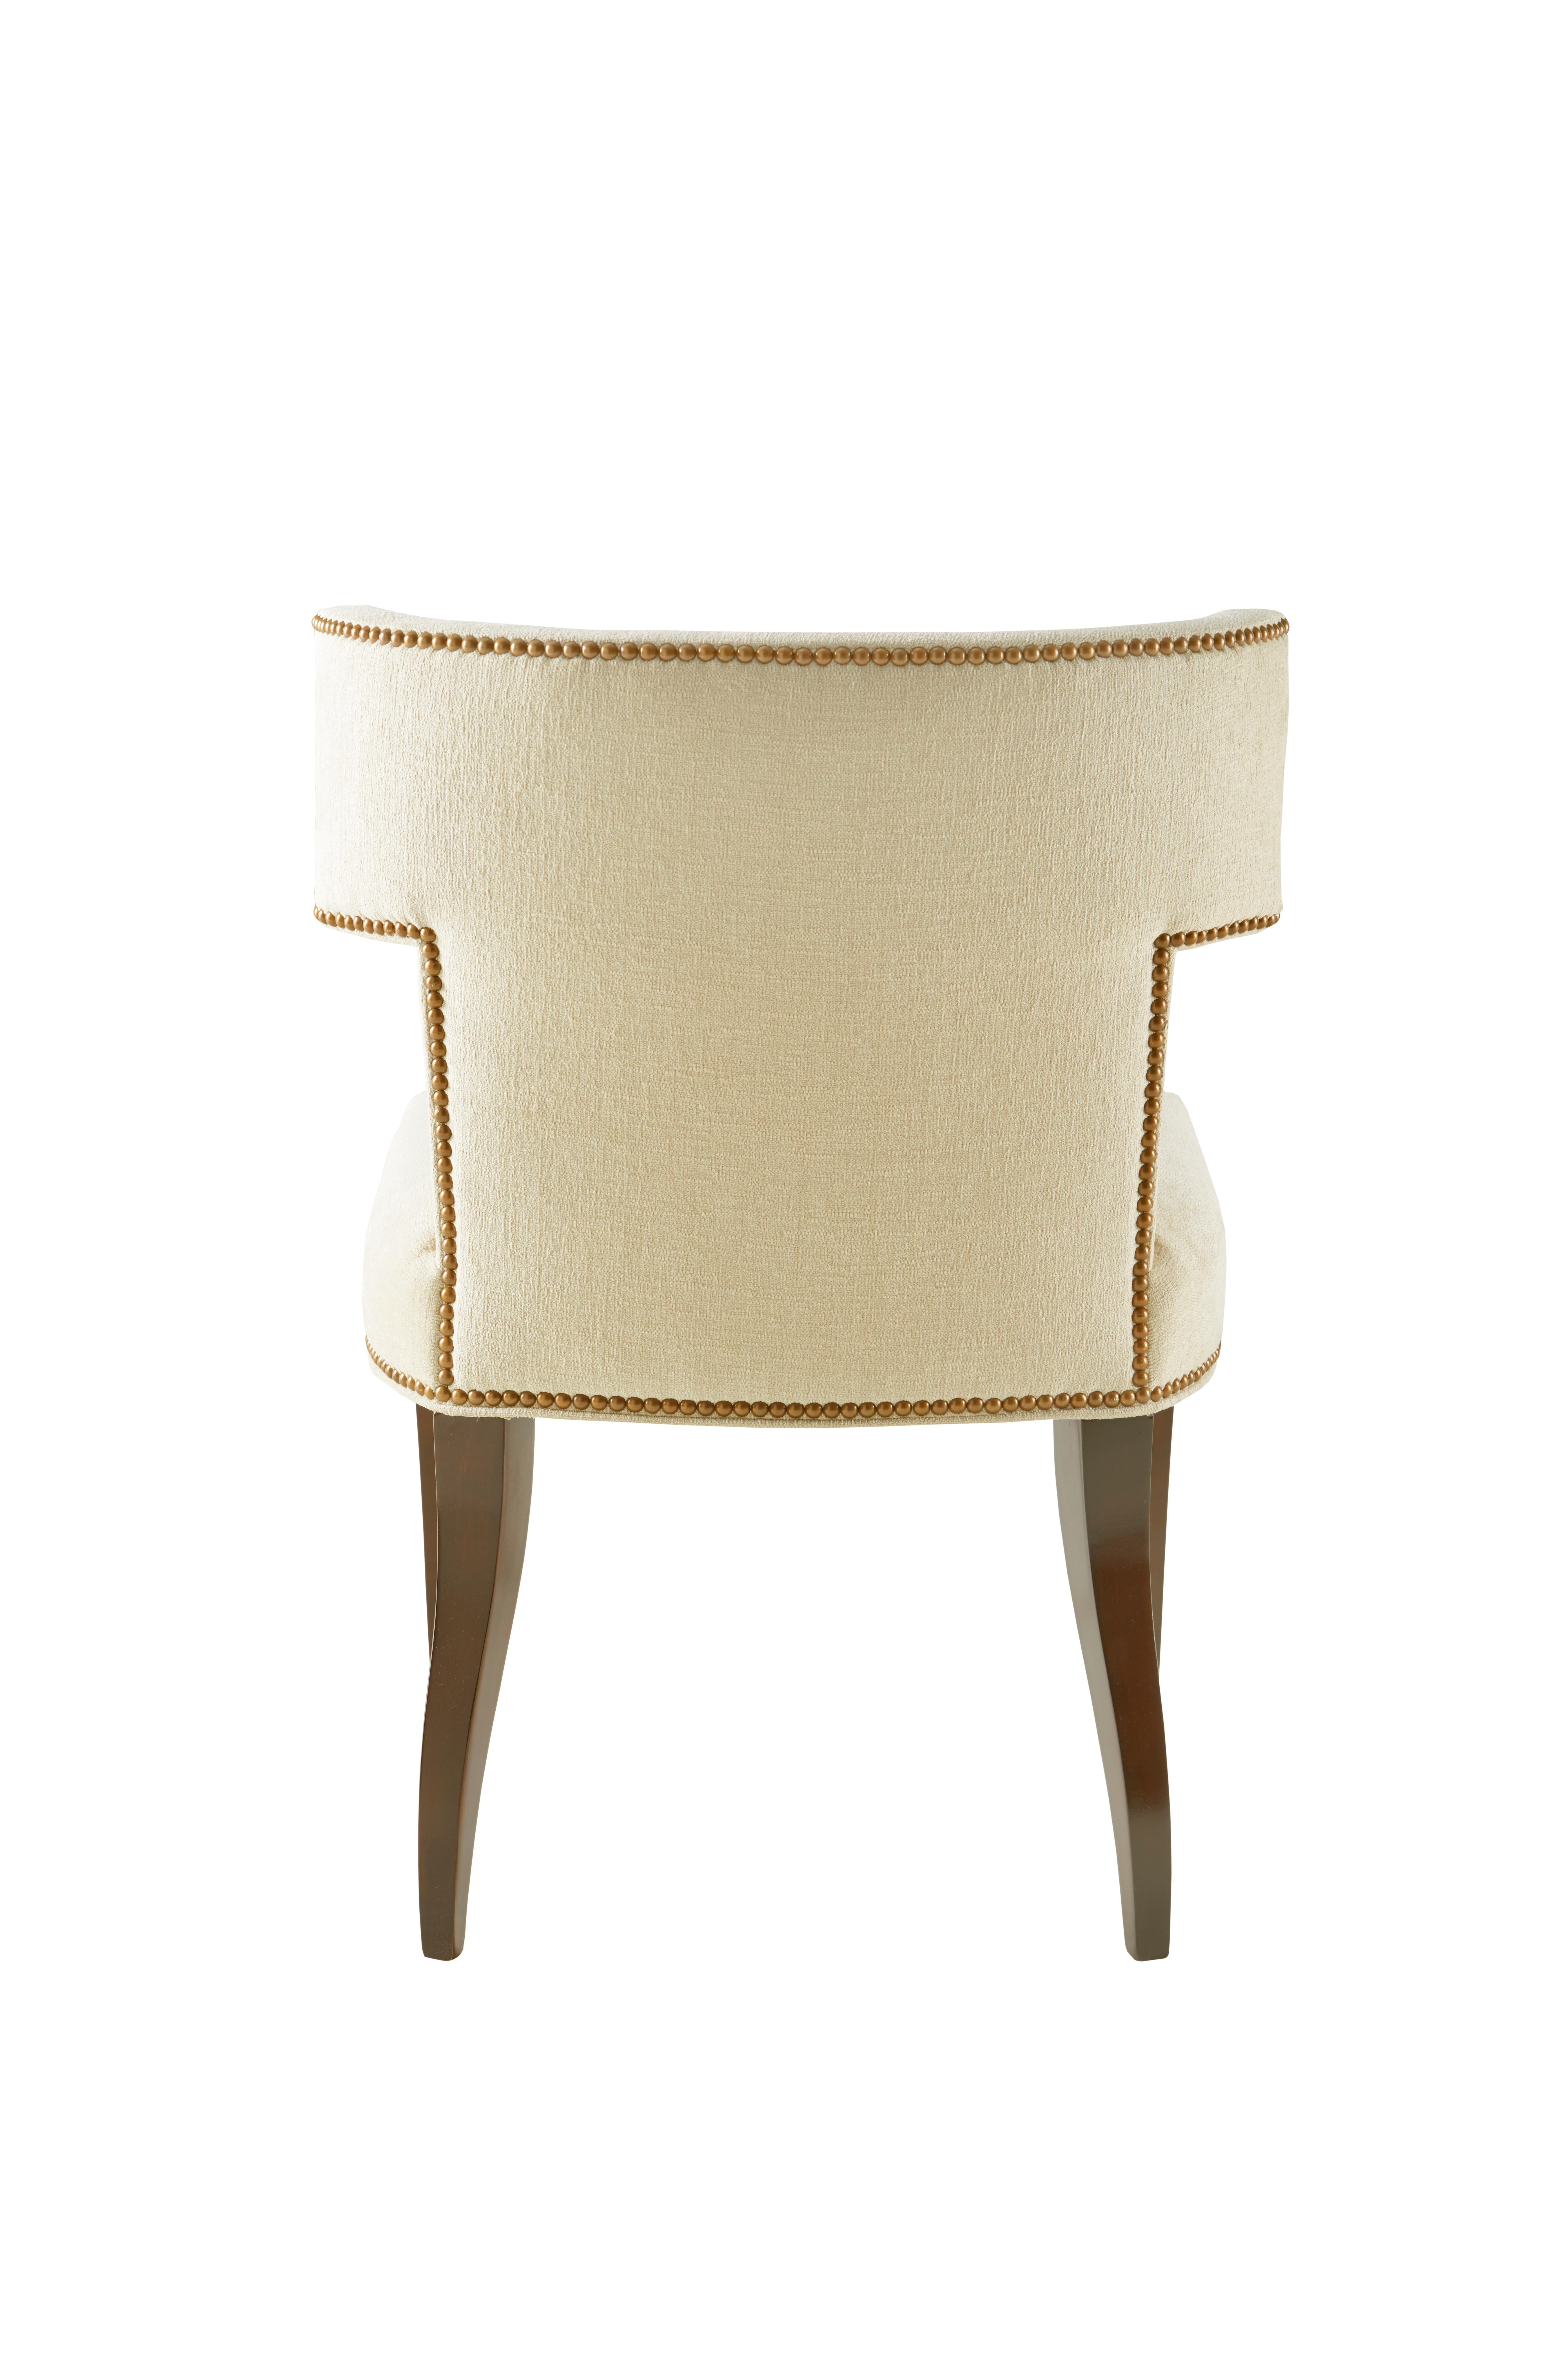 American Hotchkiss Chair in Beige and Walnut by CuratedKravet